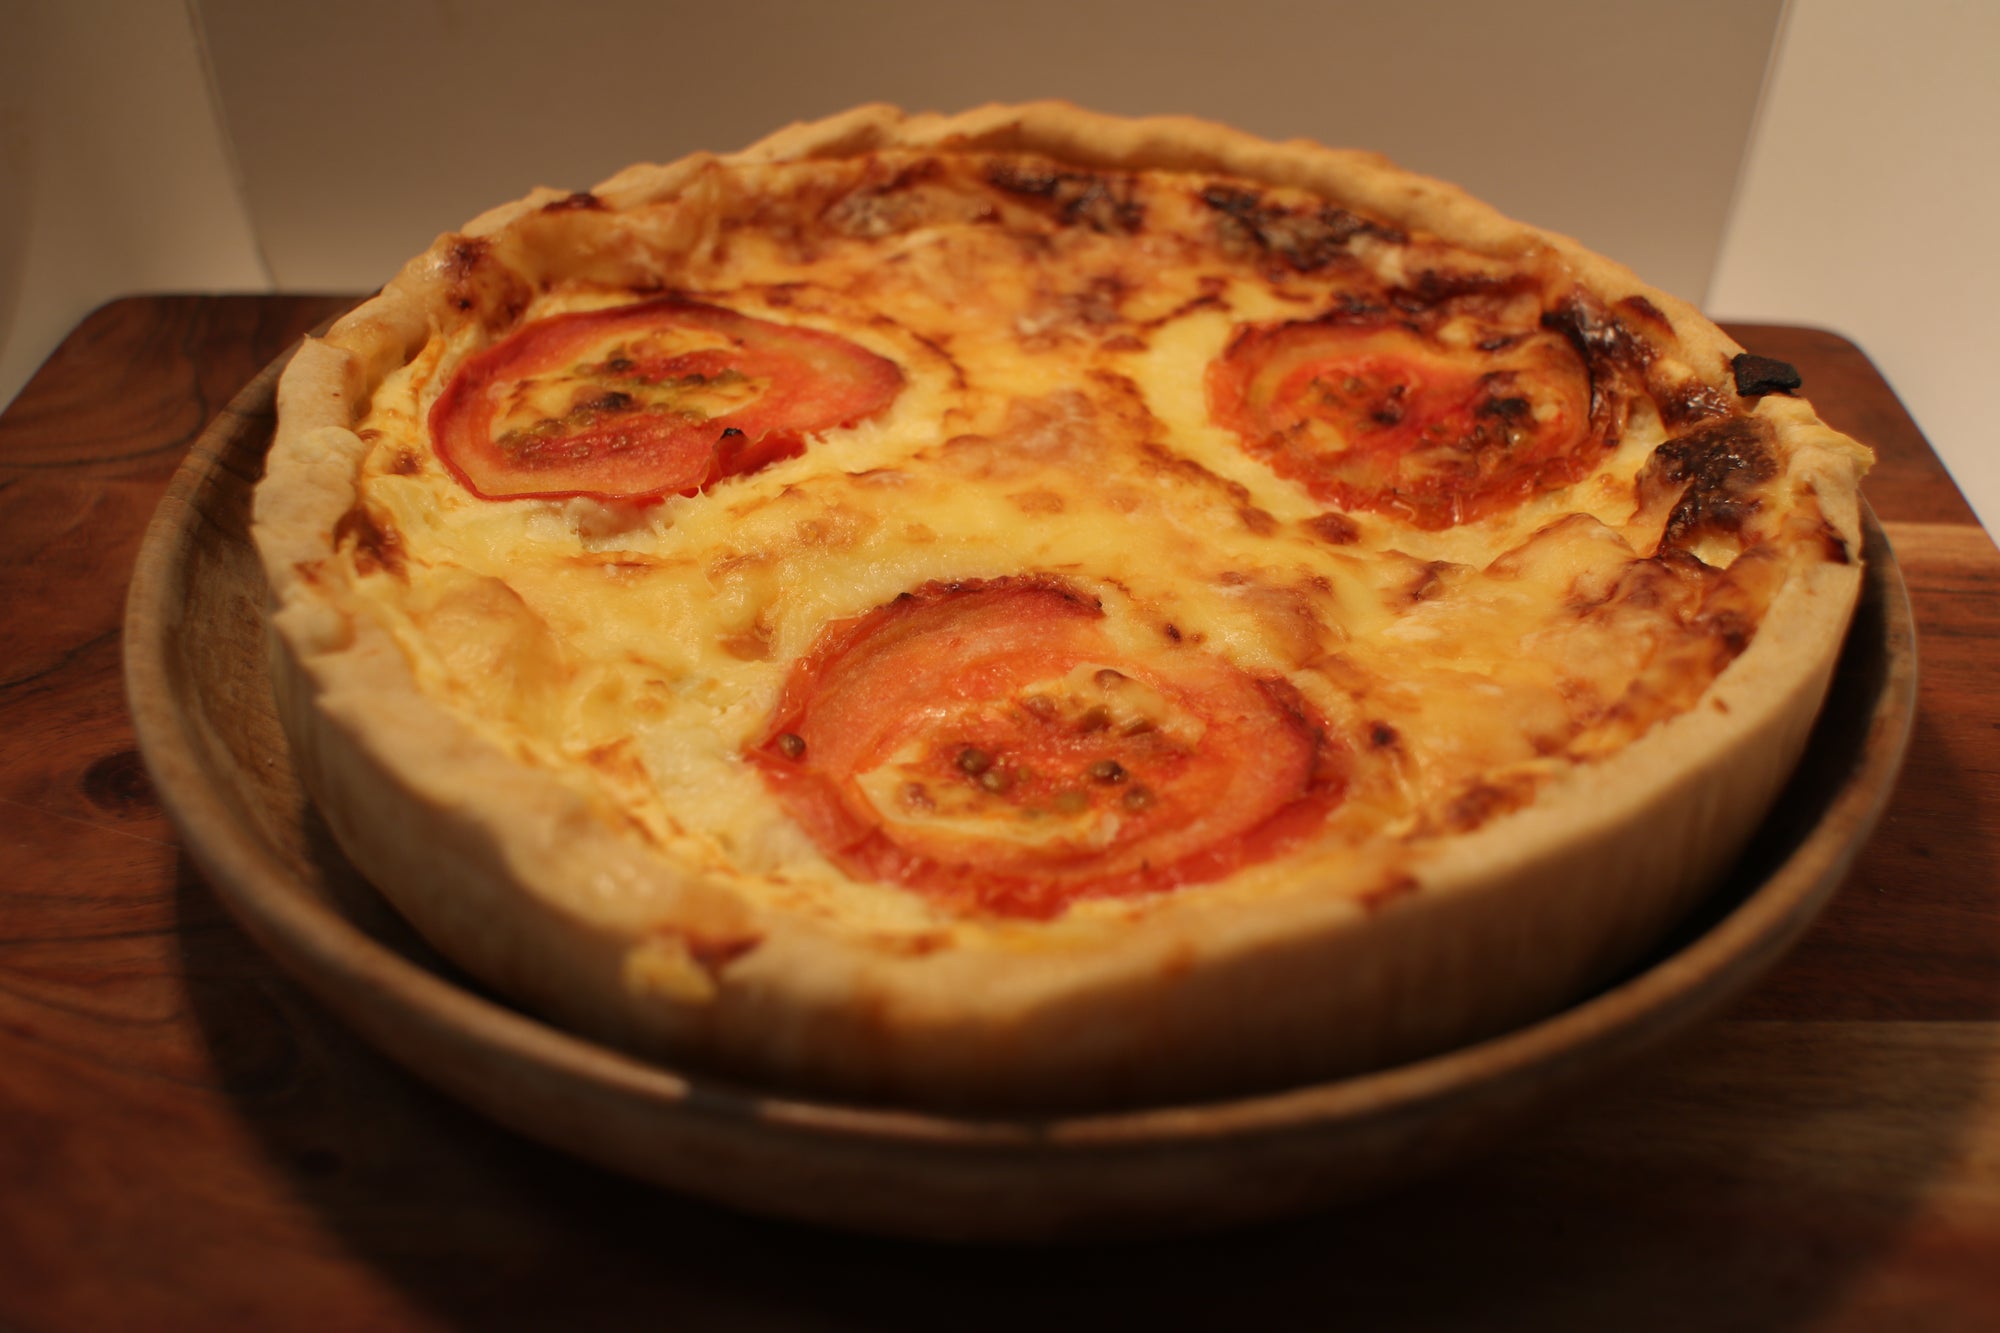 Bacon, Cheese & Onion Quiche Family Sized - Frozen